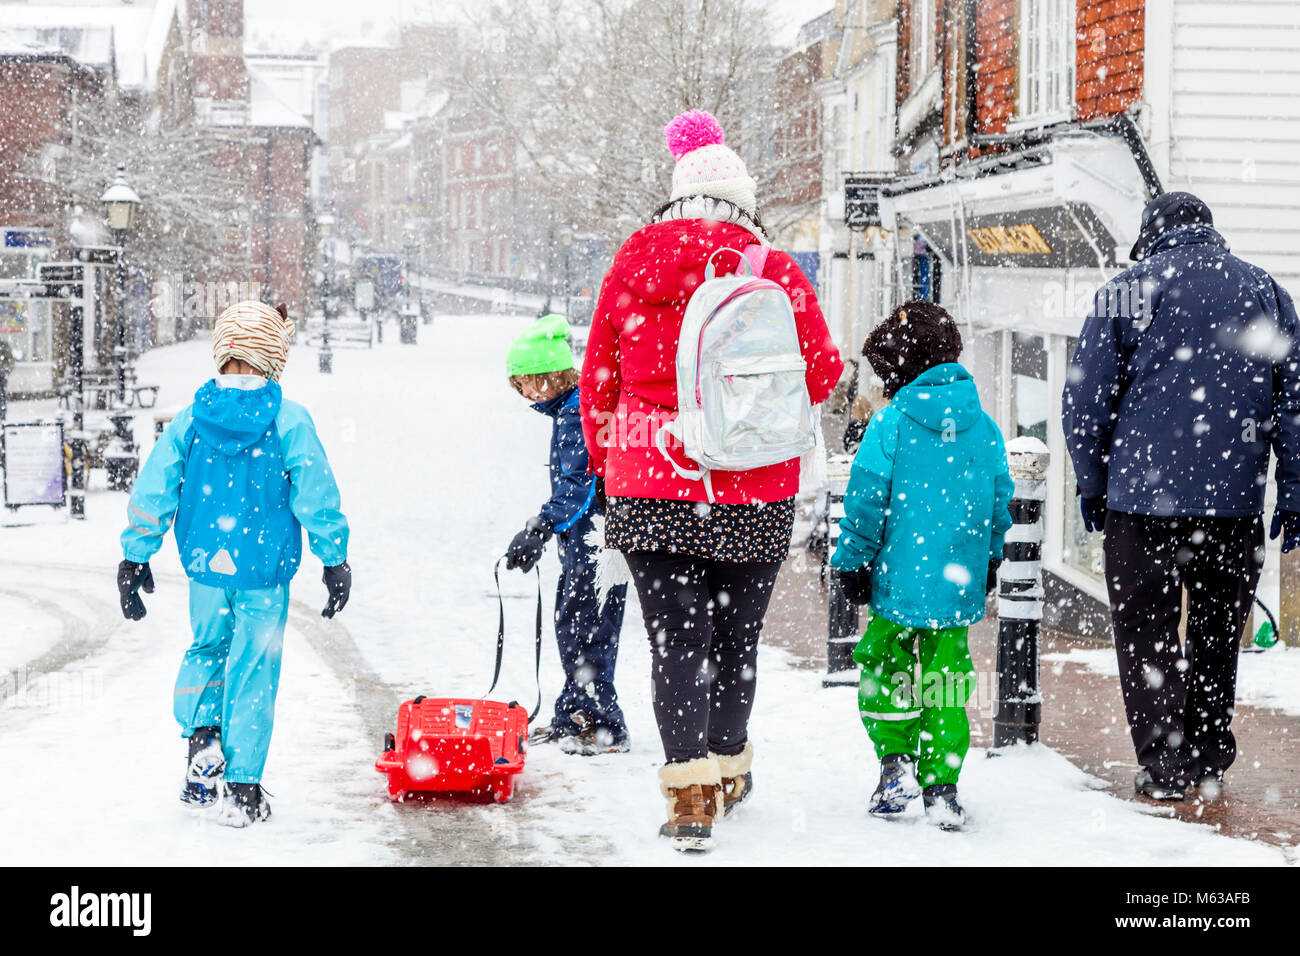 With local schools closed due to the bad weather a family take time to go sledging, High Street, Lewes, Sussex, UK Stock Photo